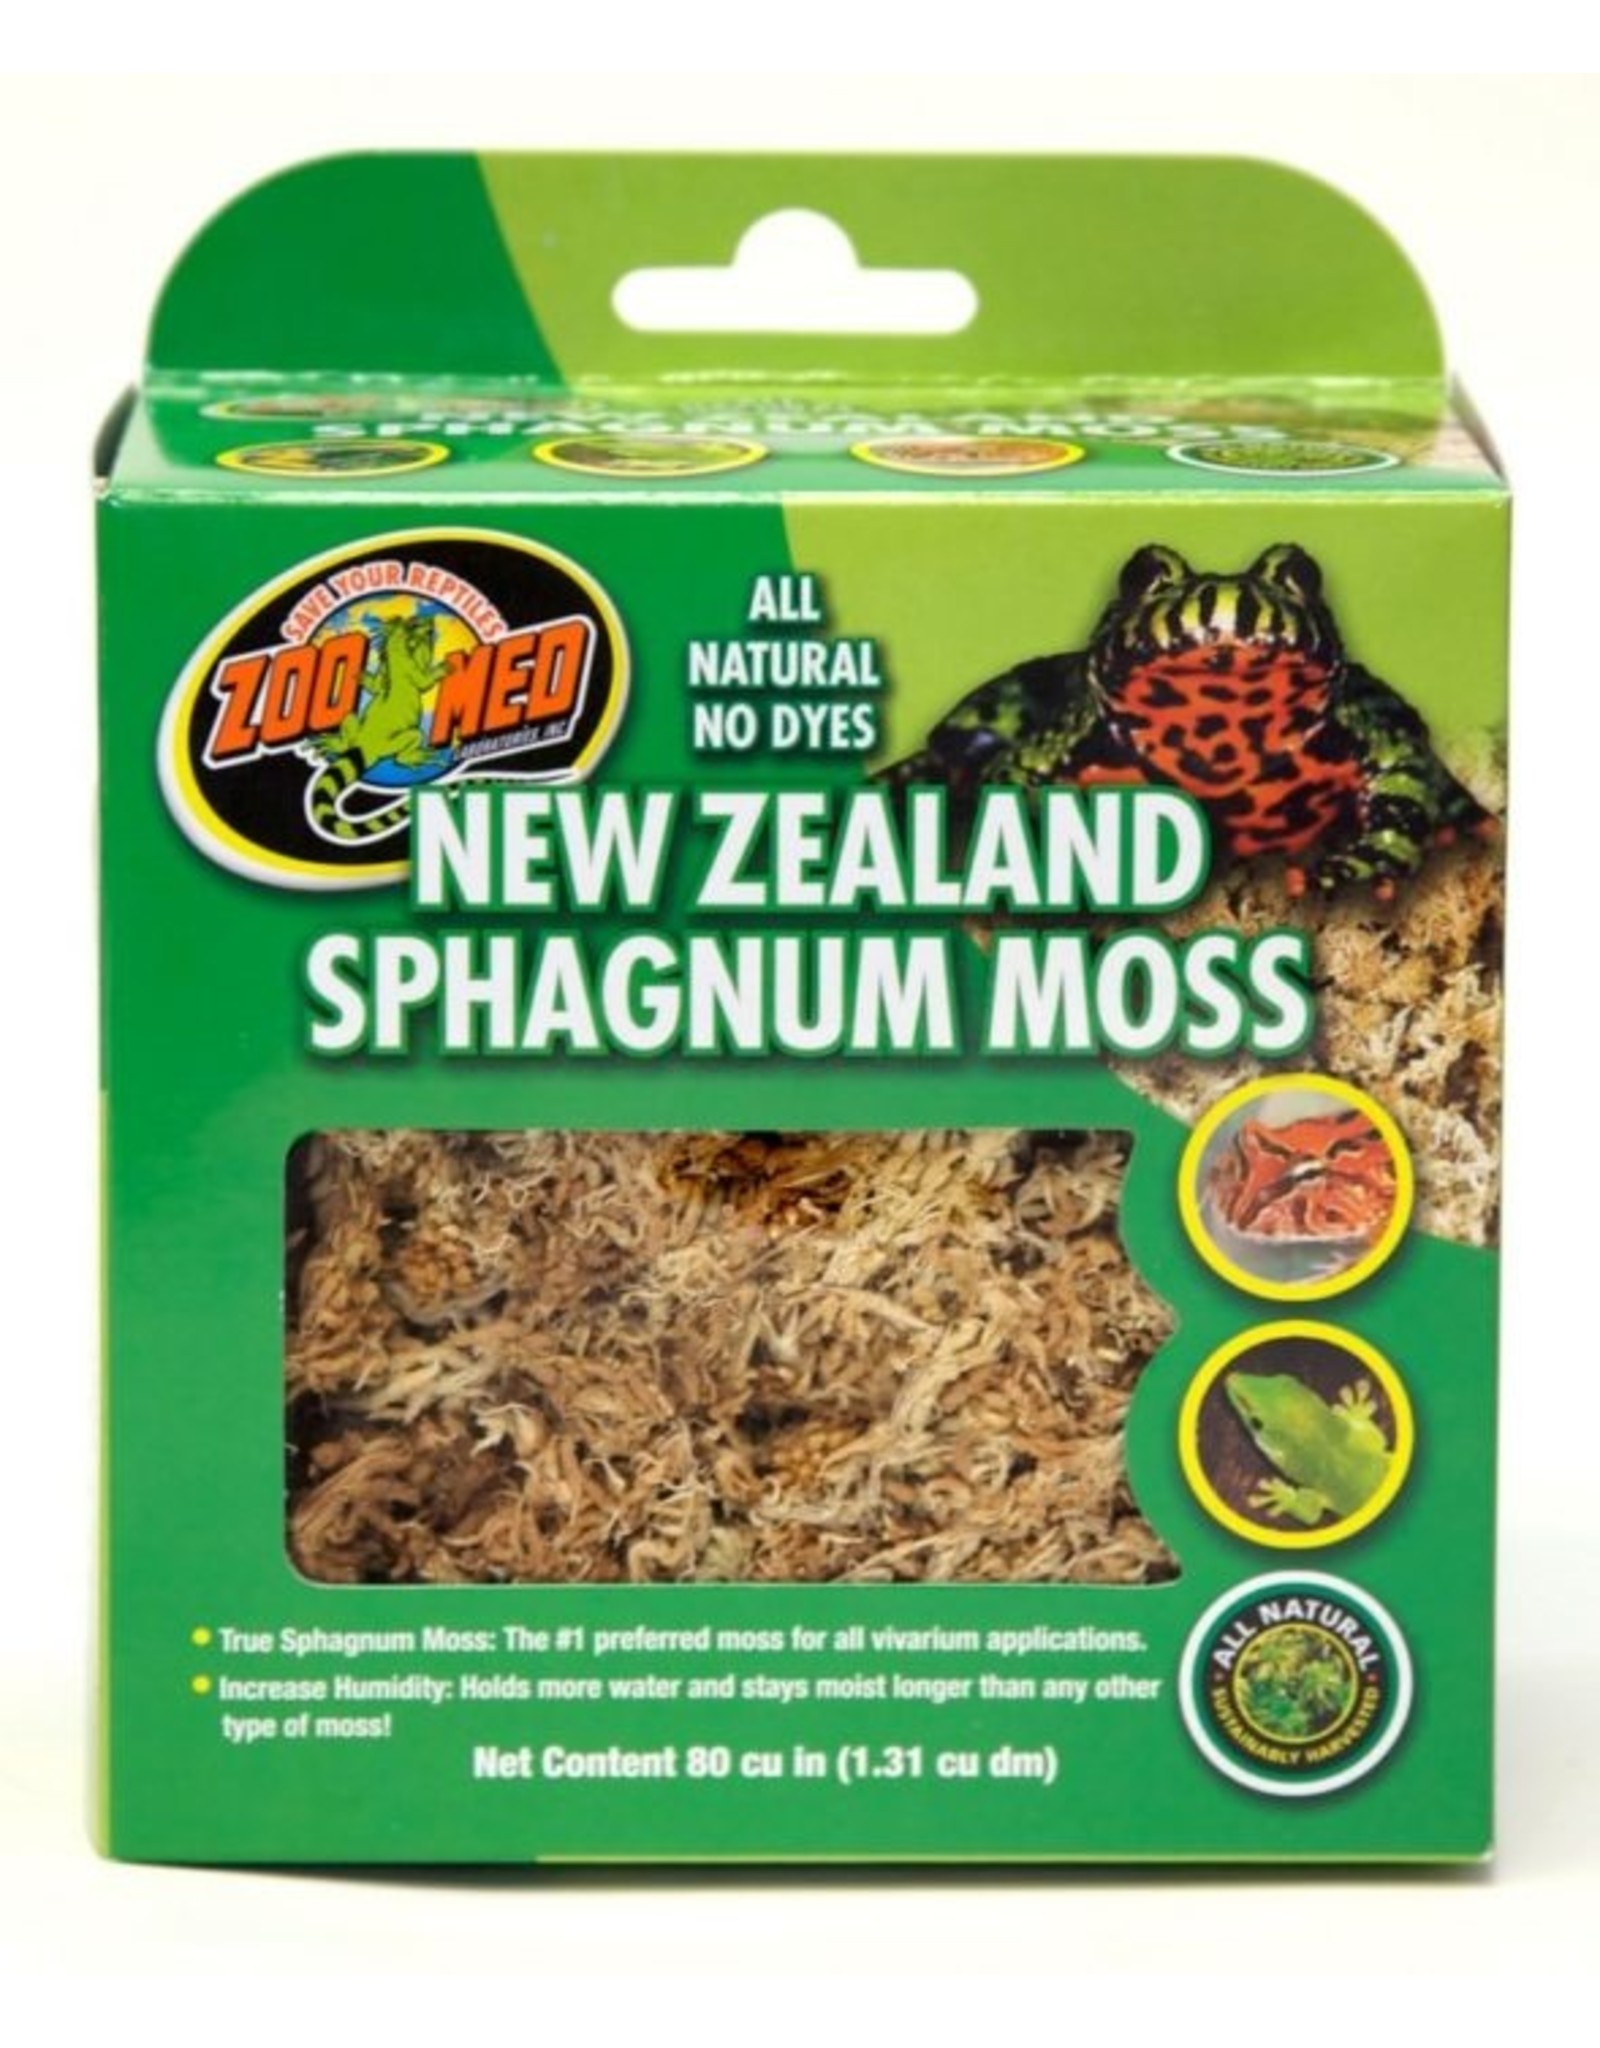 Zoo Med ZOO MED New Zealand Sphagnum Moss 80Cu In